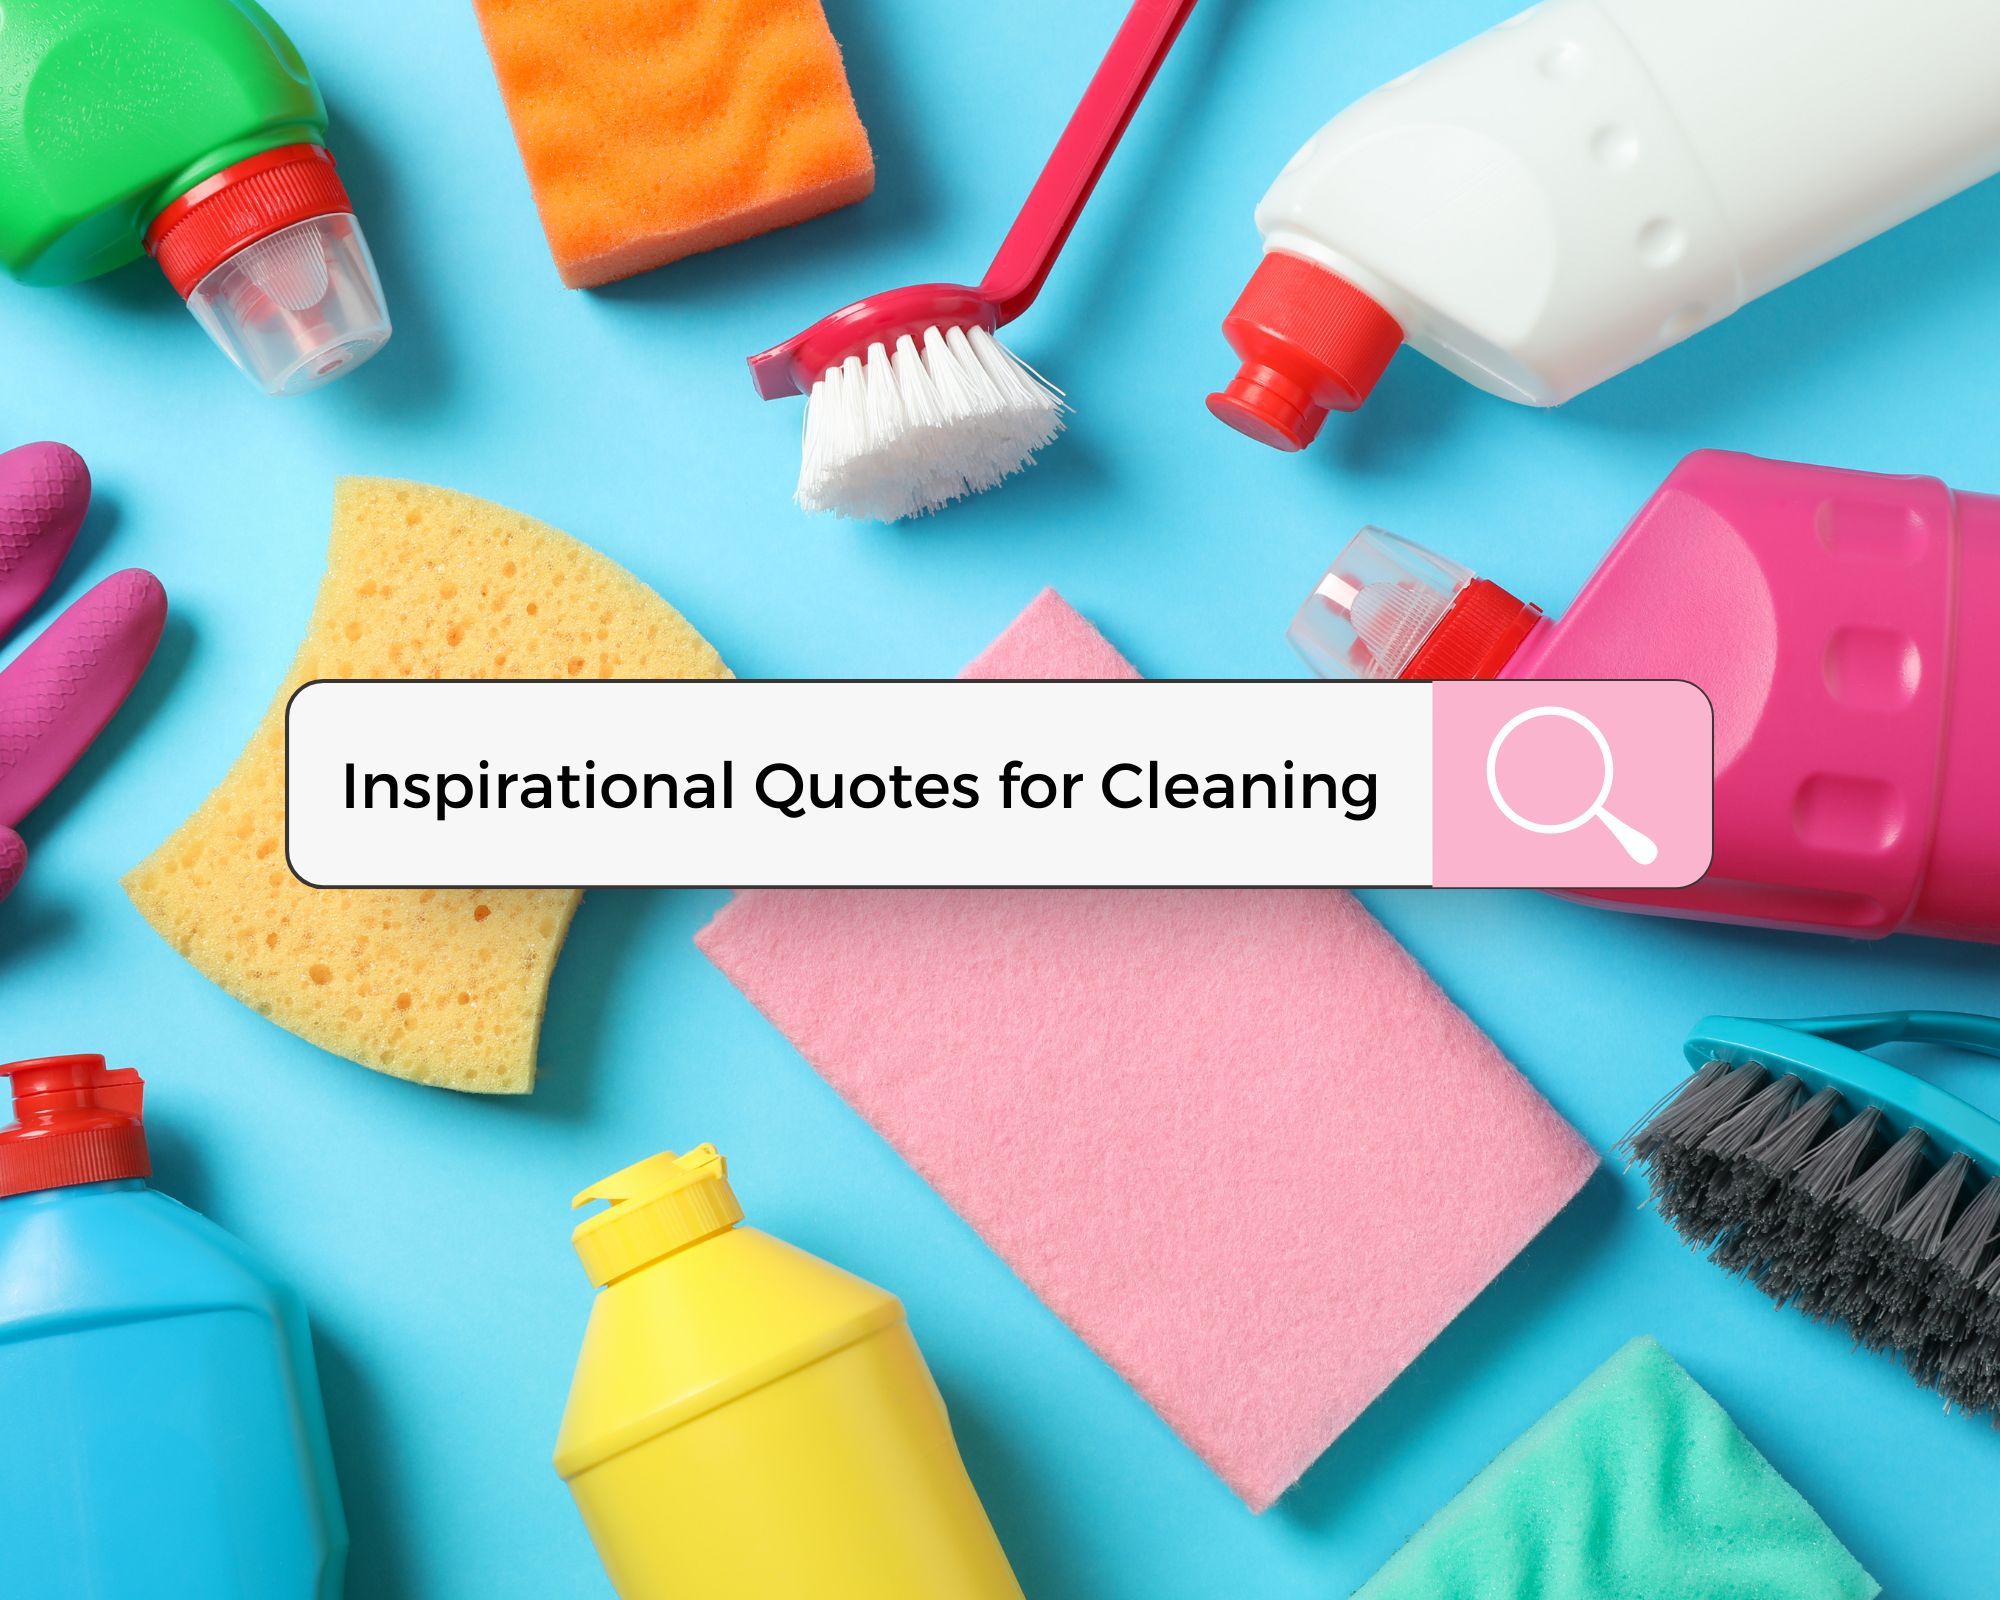 Inspirational Quotes for a Sparkling Clean Home's featured image